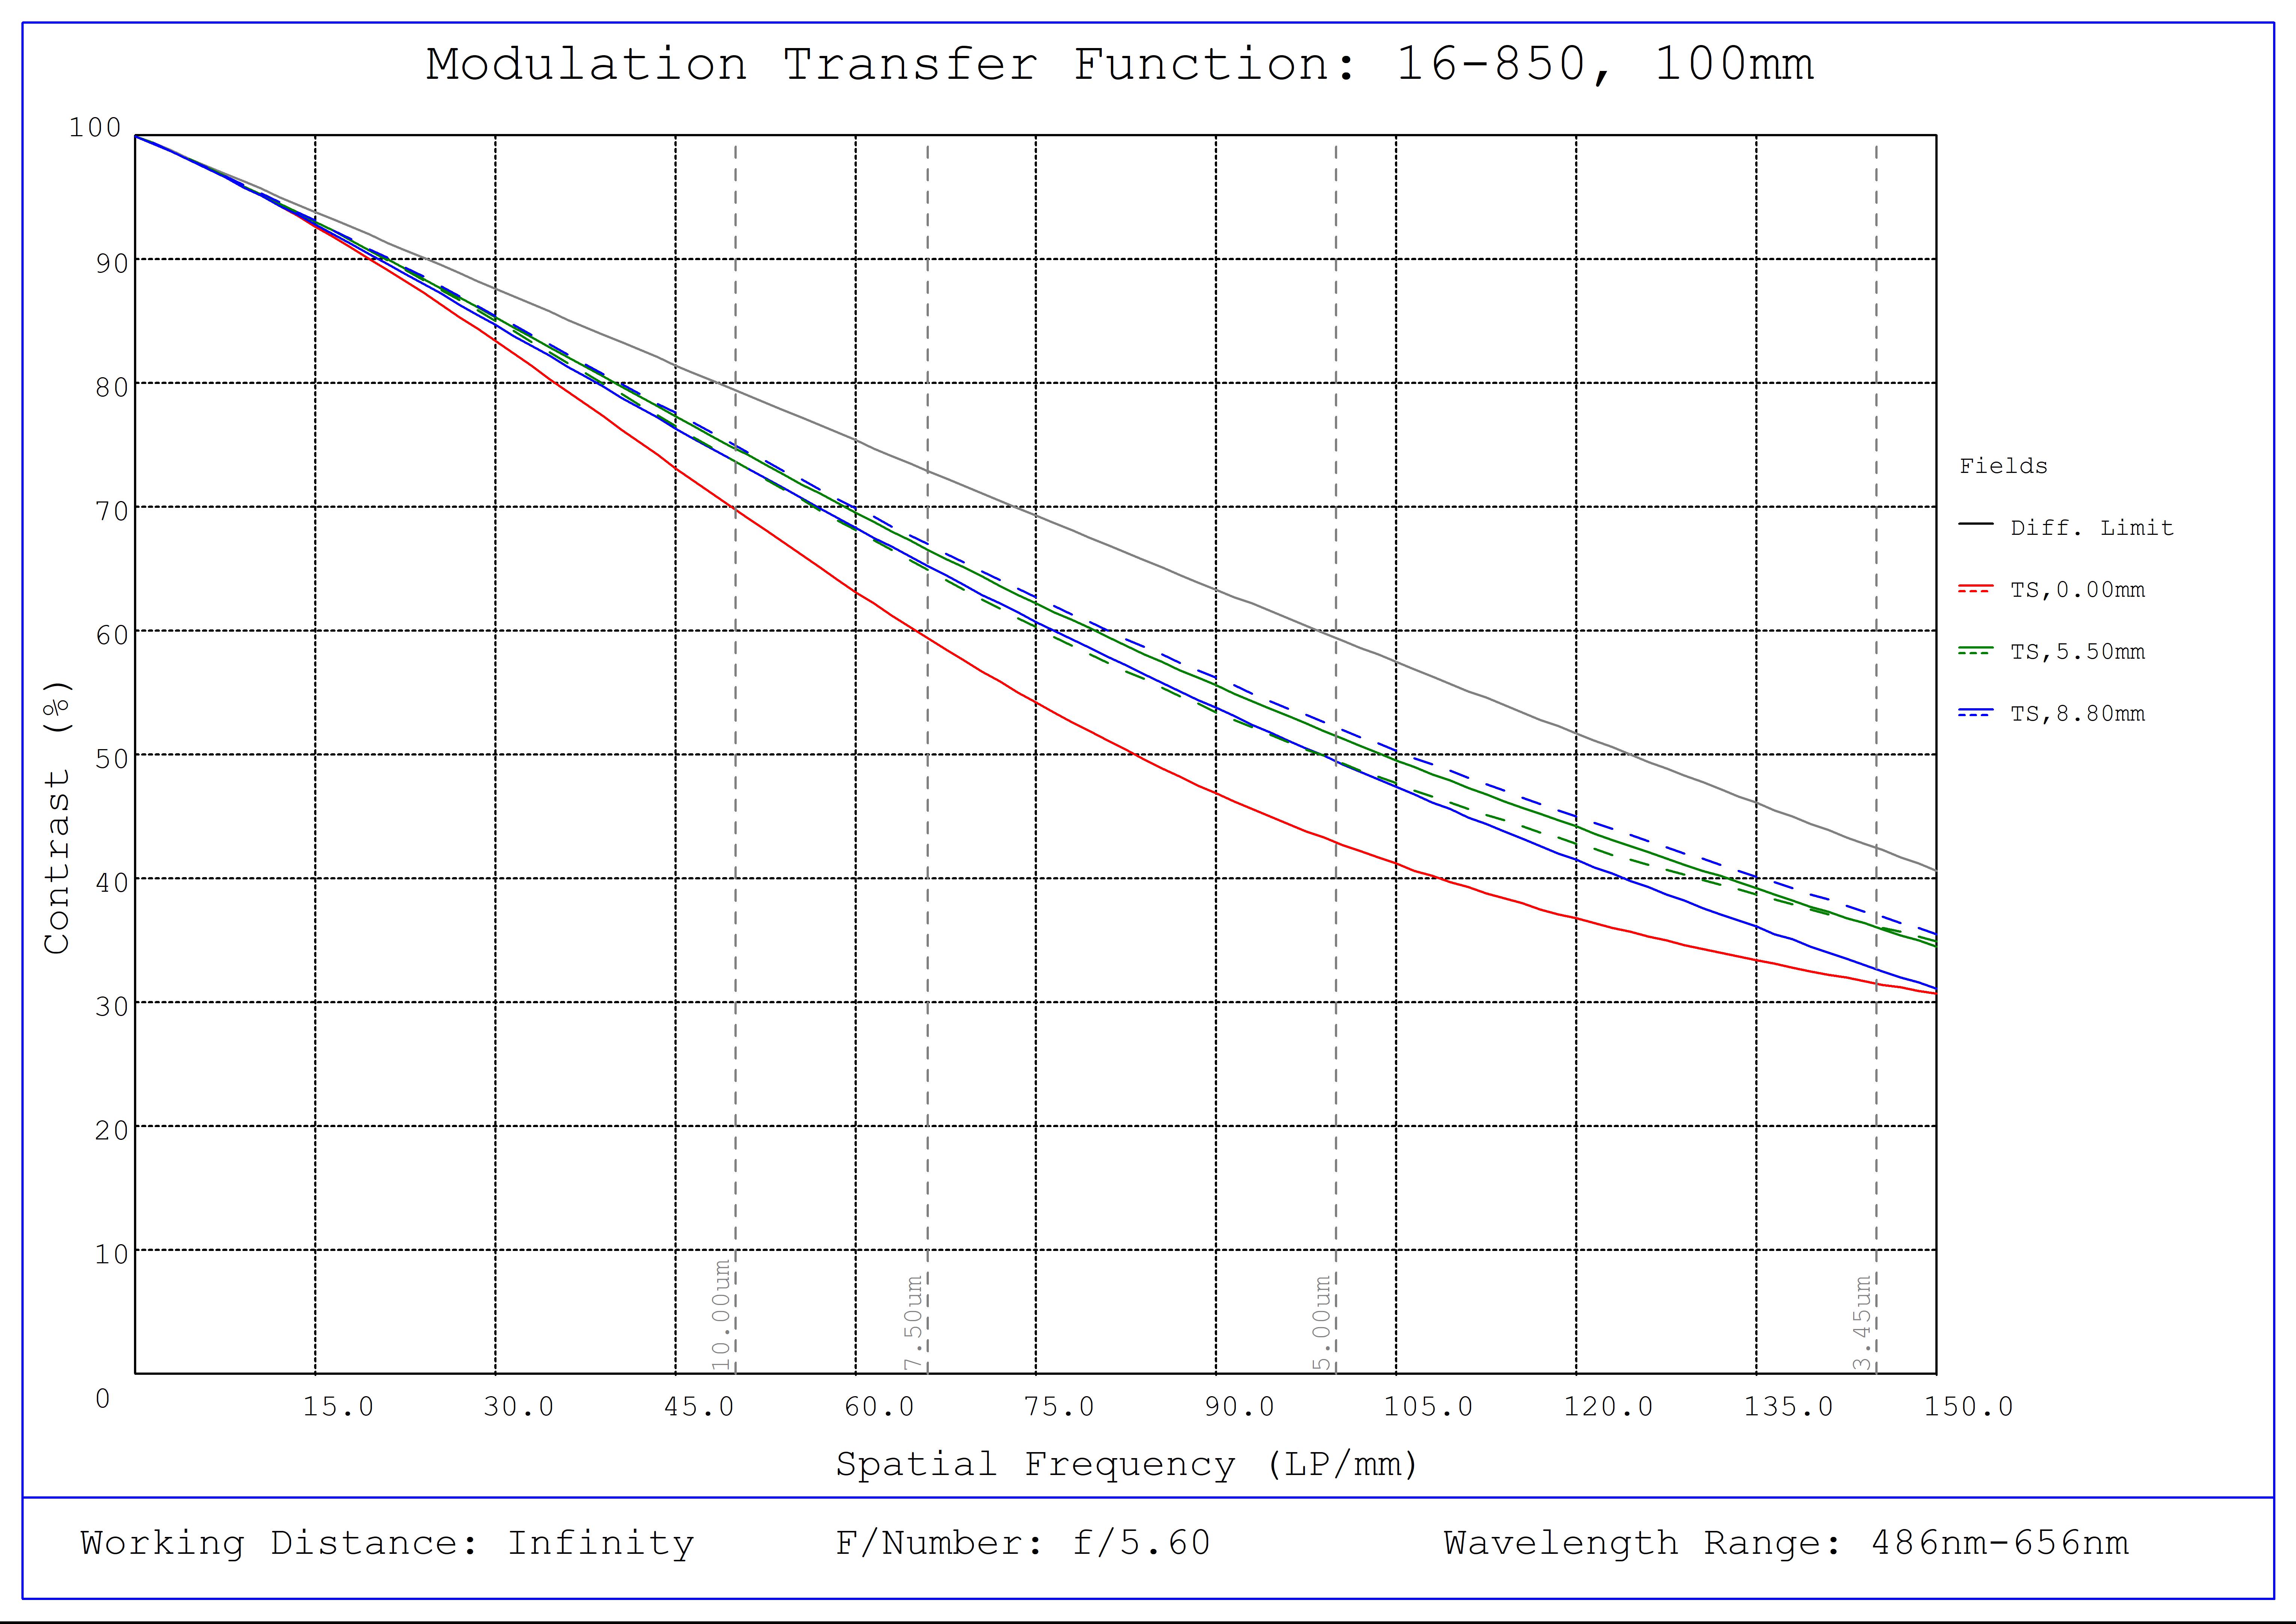 #16-850, 100mm, f/5.6 Athermal Lens, Modulated Transfer Function (MTF) Plot, Working Distance: Infinity, f5.6